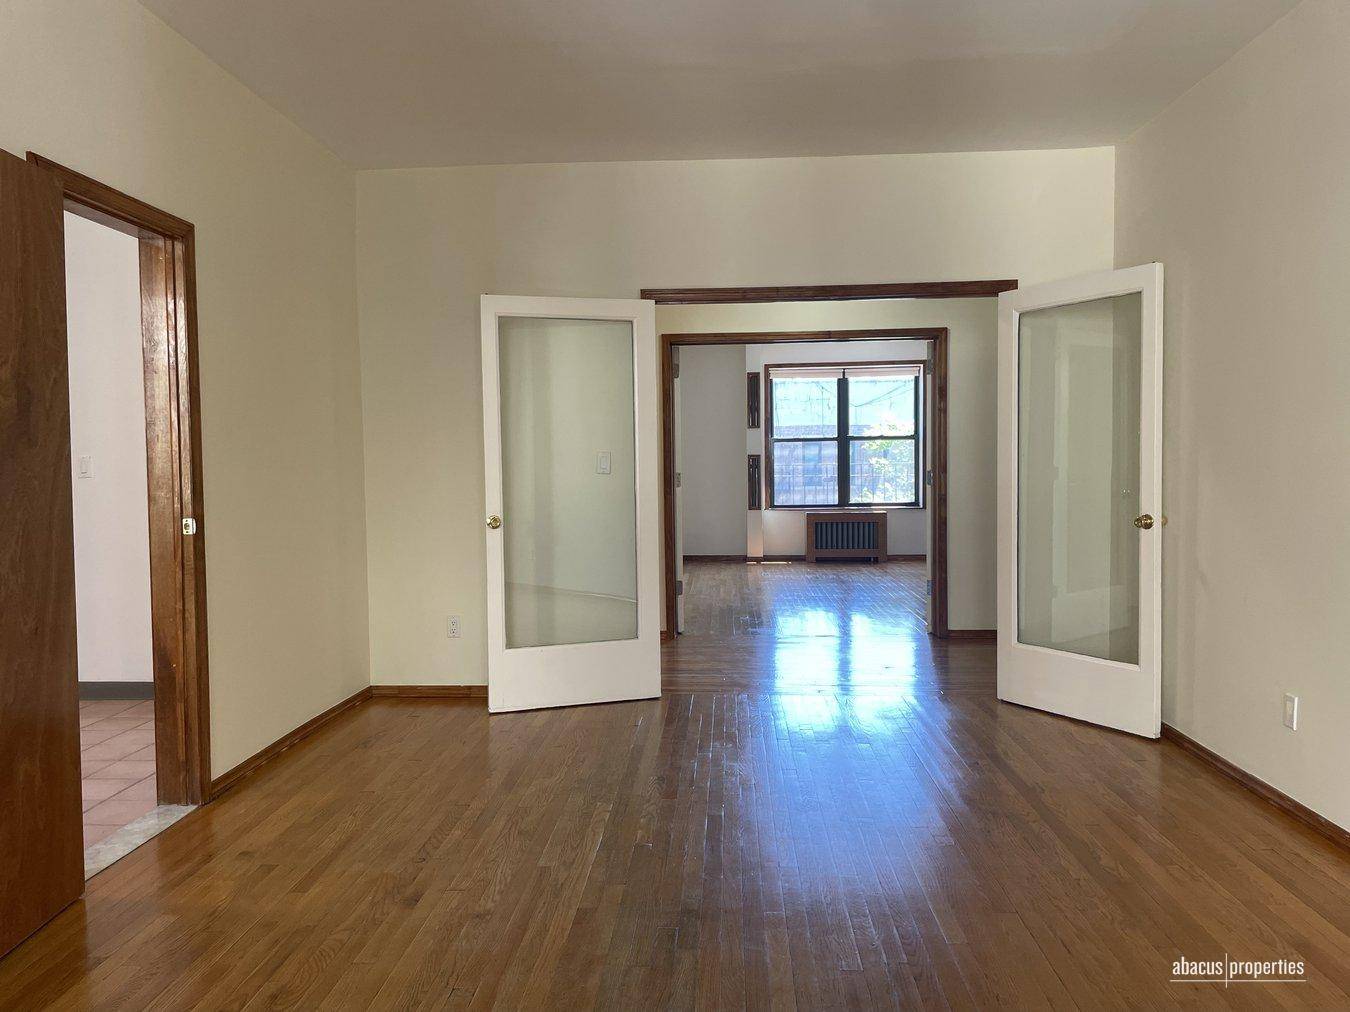 An Apartment that feels like a House Welcome to apartment A45 at 1038 Ocean Ave in the heart of Ditmas Park.